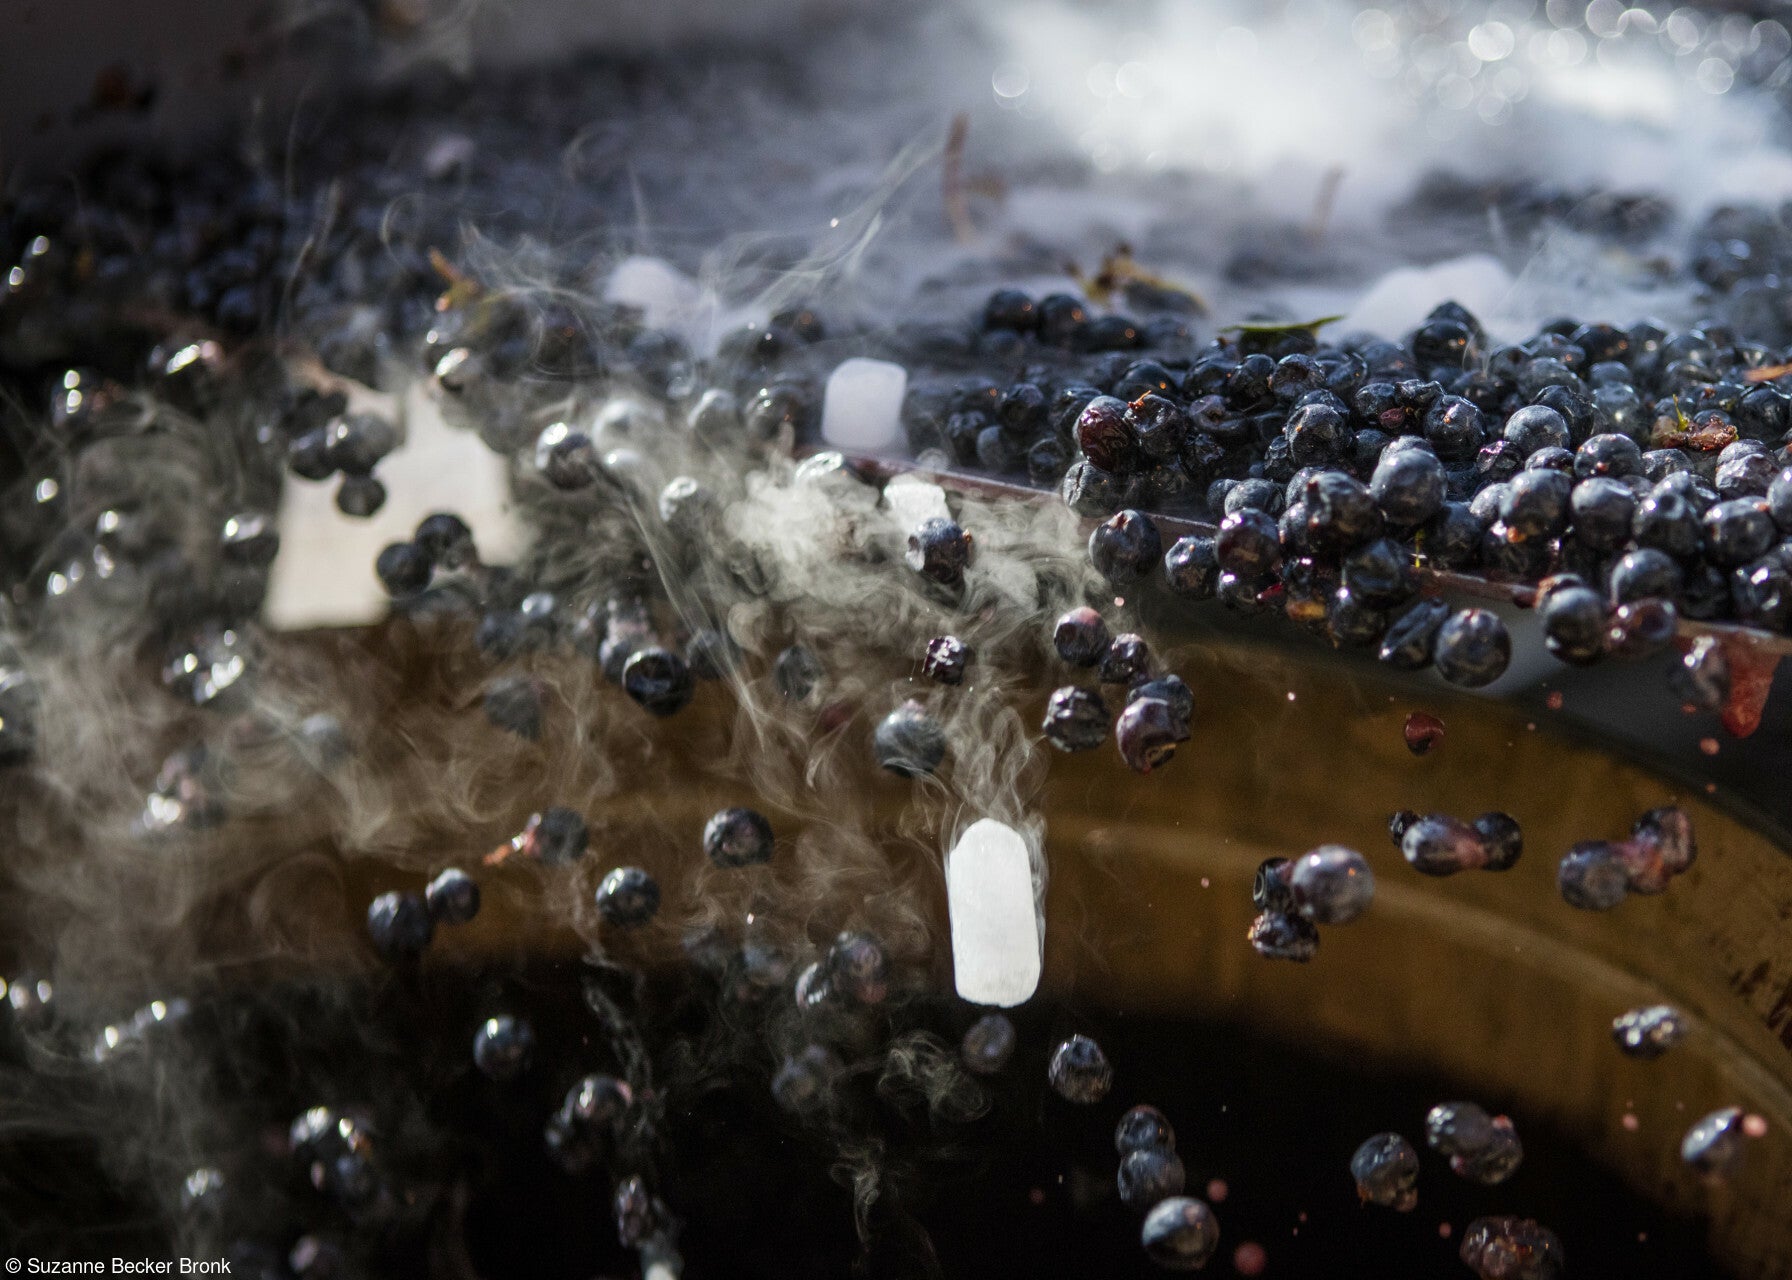 the grapes fall into a vat to be processed.  dry ice inhibits fermentation. 